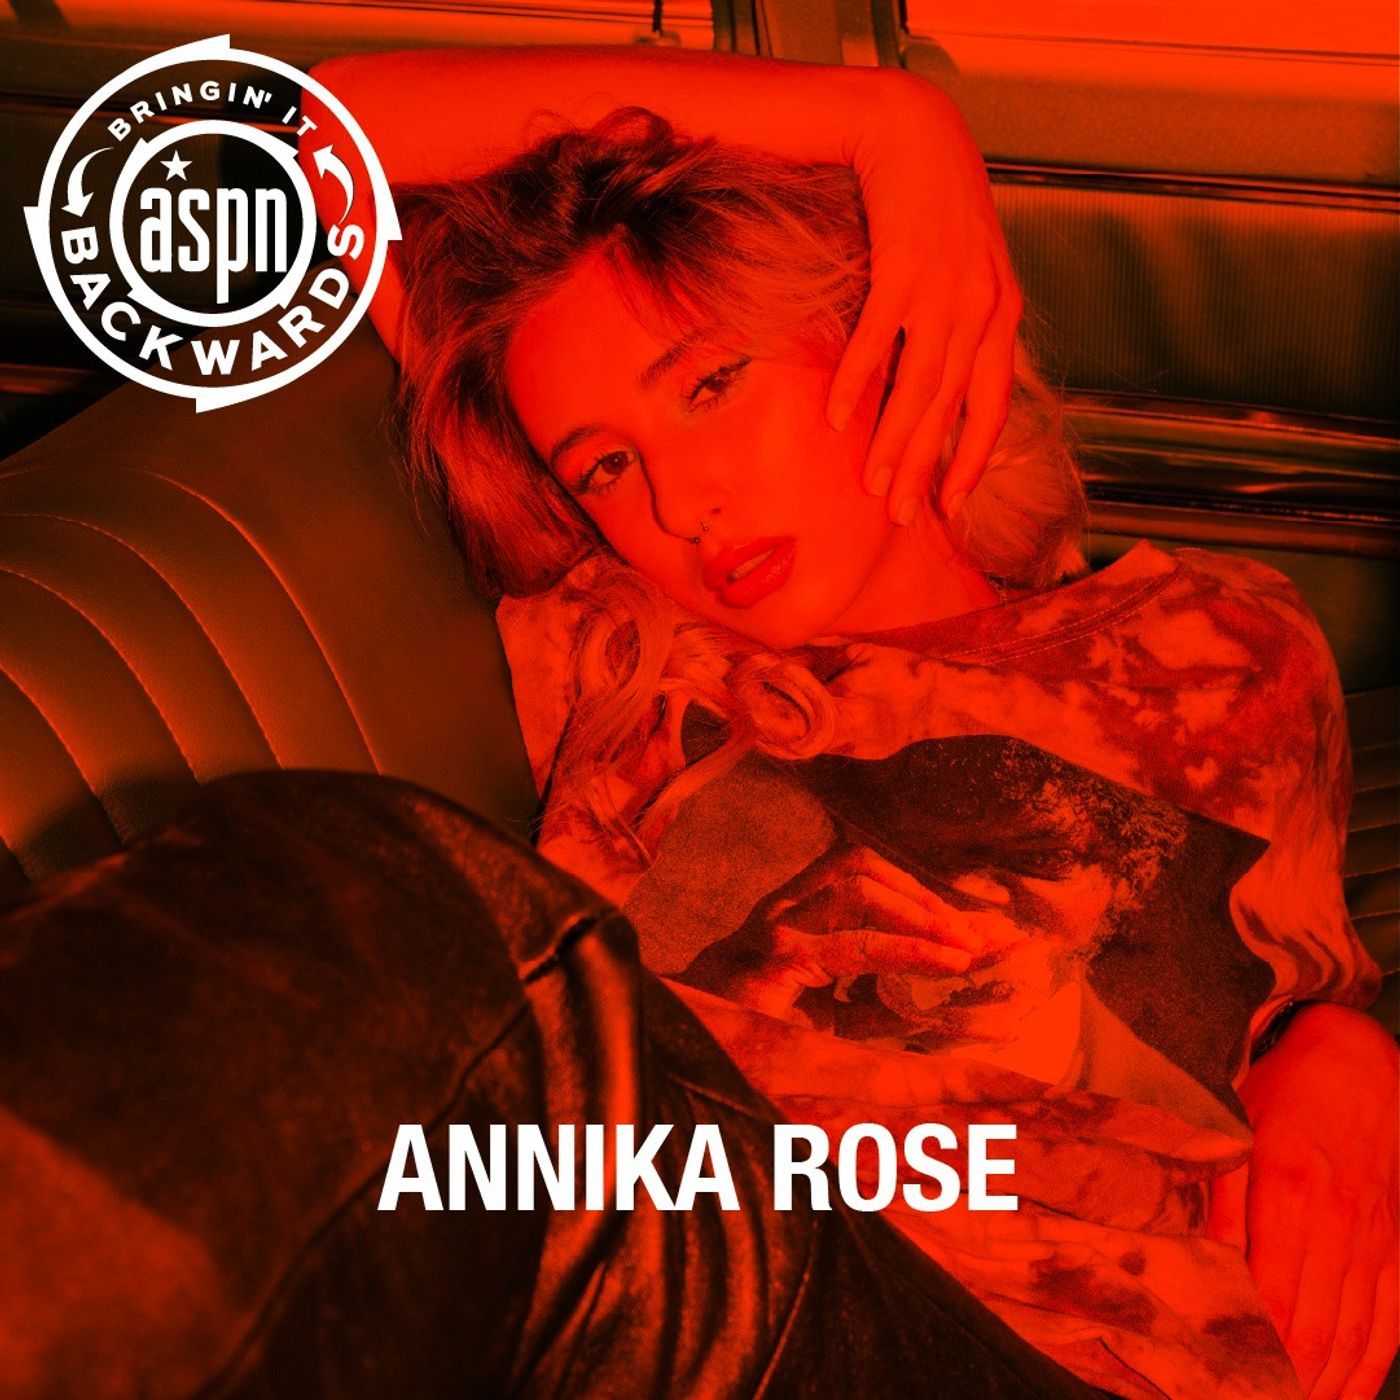 Interview with Annika Rose Image